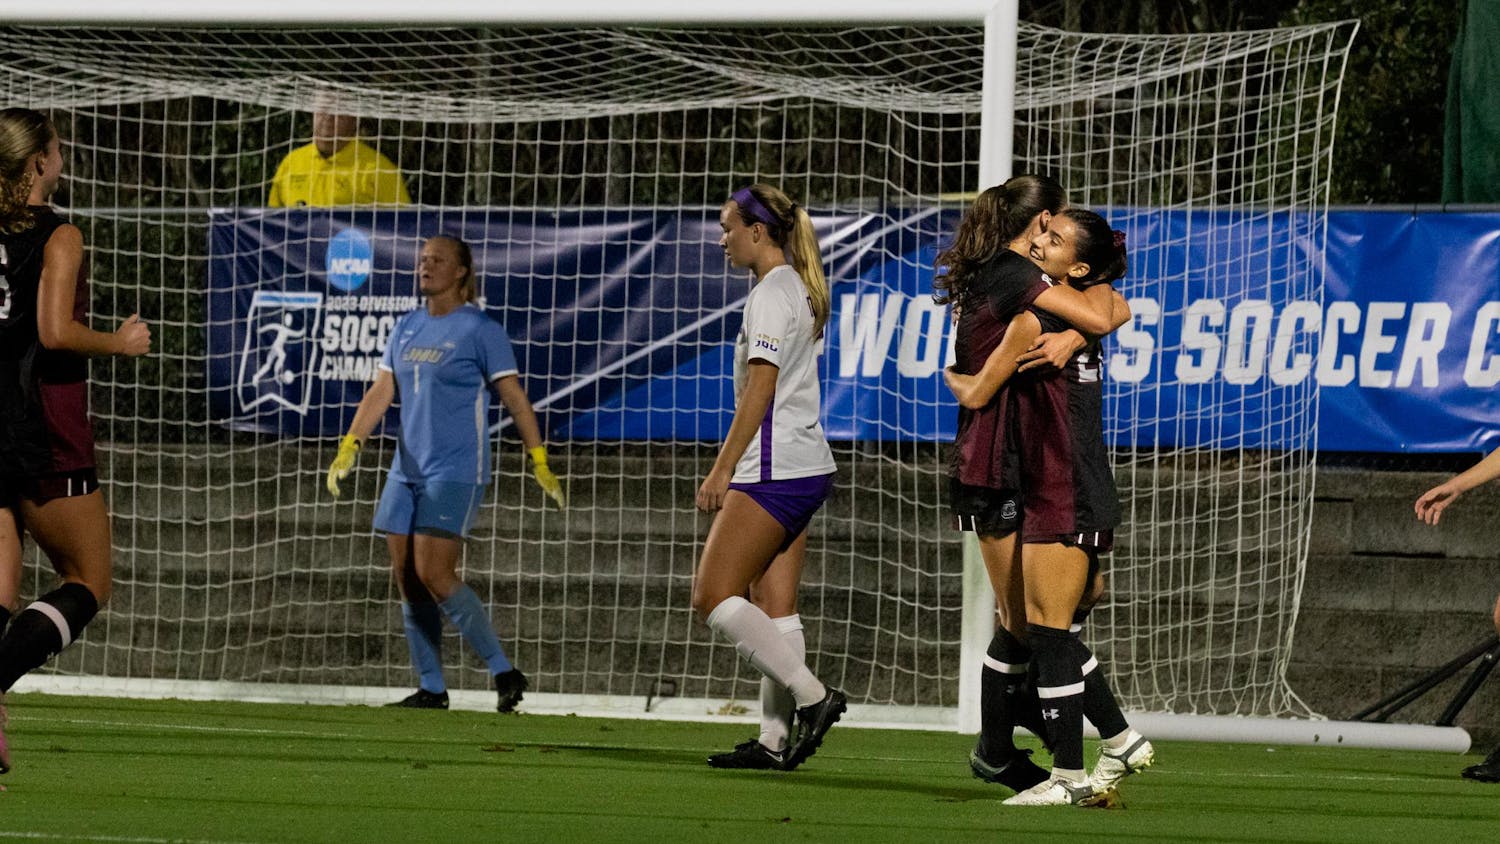 Junior midfielder Lily Render hugs senior forward Corinna Zullo in celebration of Render's second goal of the game against James Madison on Nov. 10, 2023. With the win, the Gamecocks advanced to the second round of the Women's College Cup, and Render now has four goals on the season.